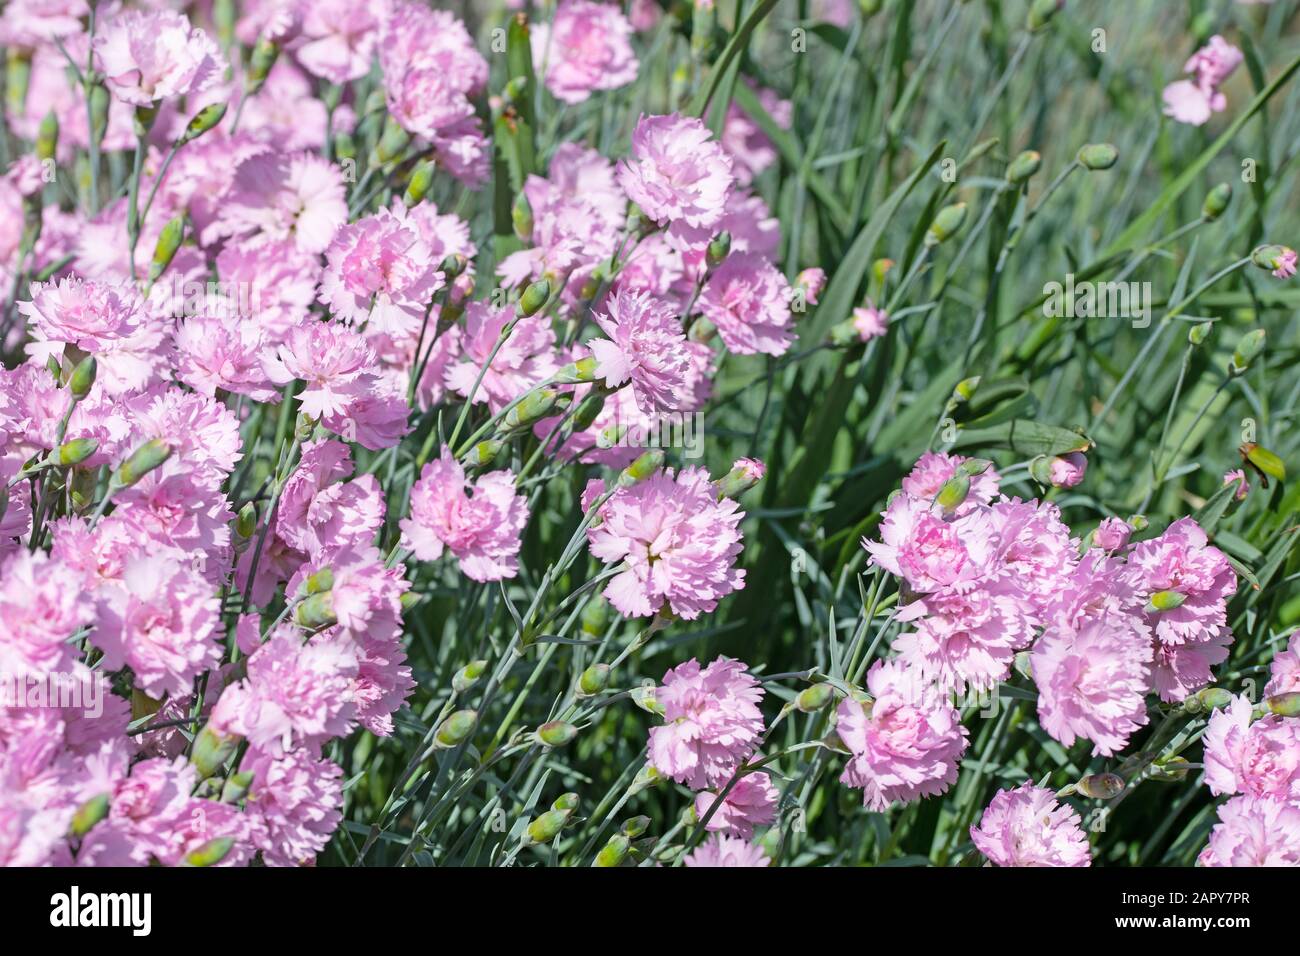 Flowering carnations, dianthus, in the garden Stock Photo